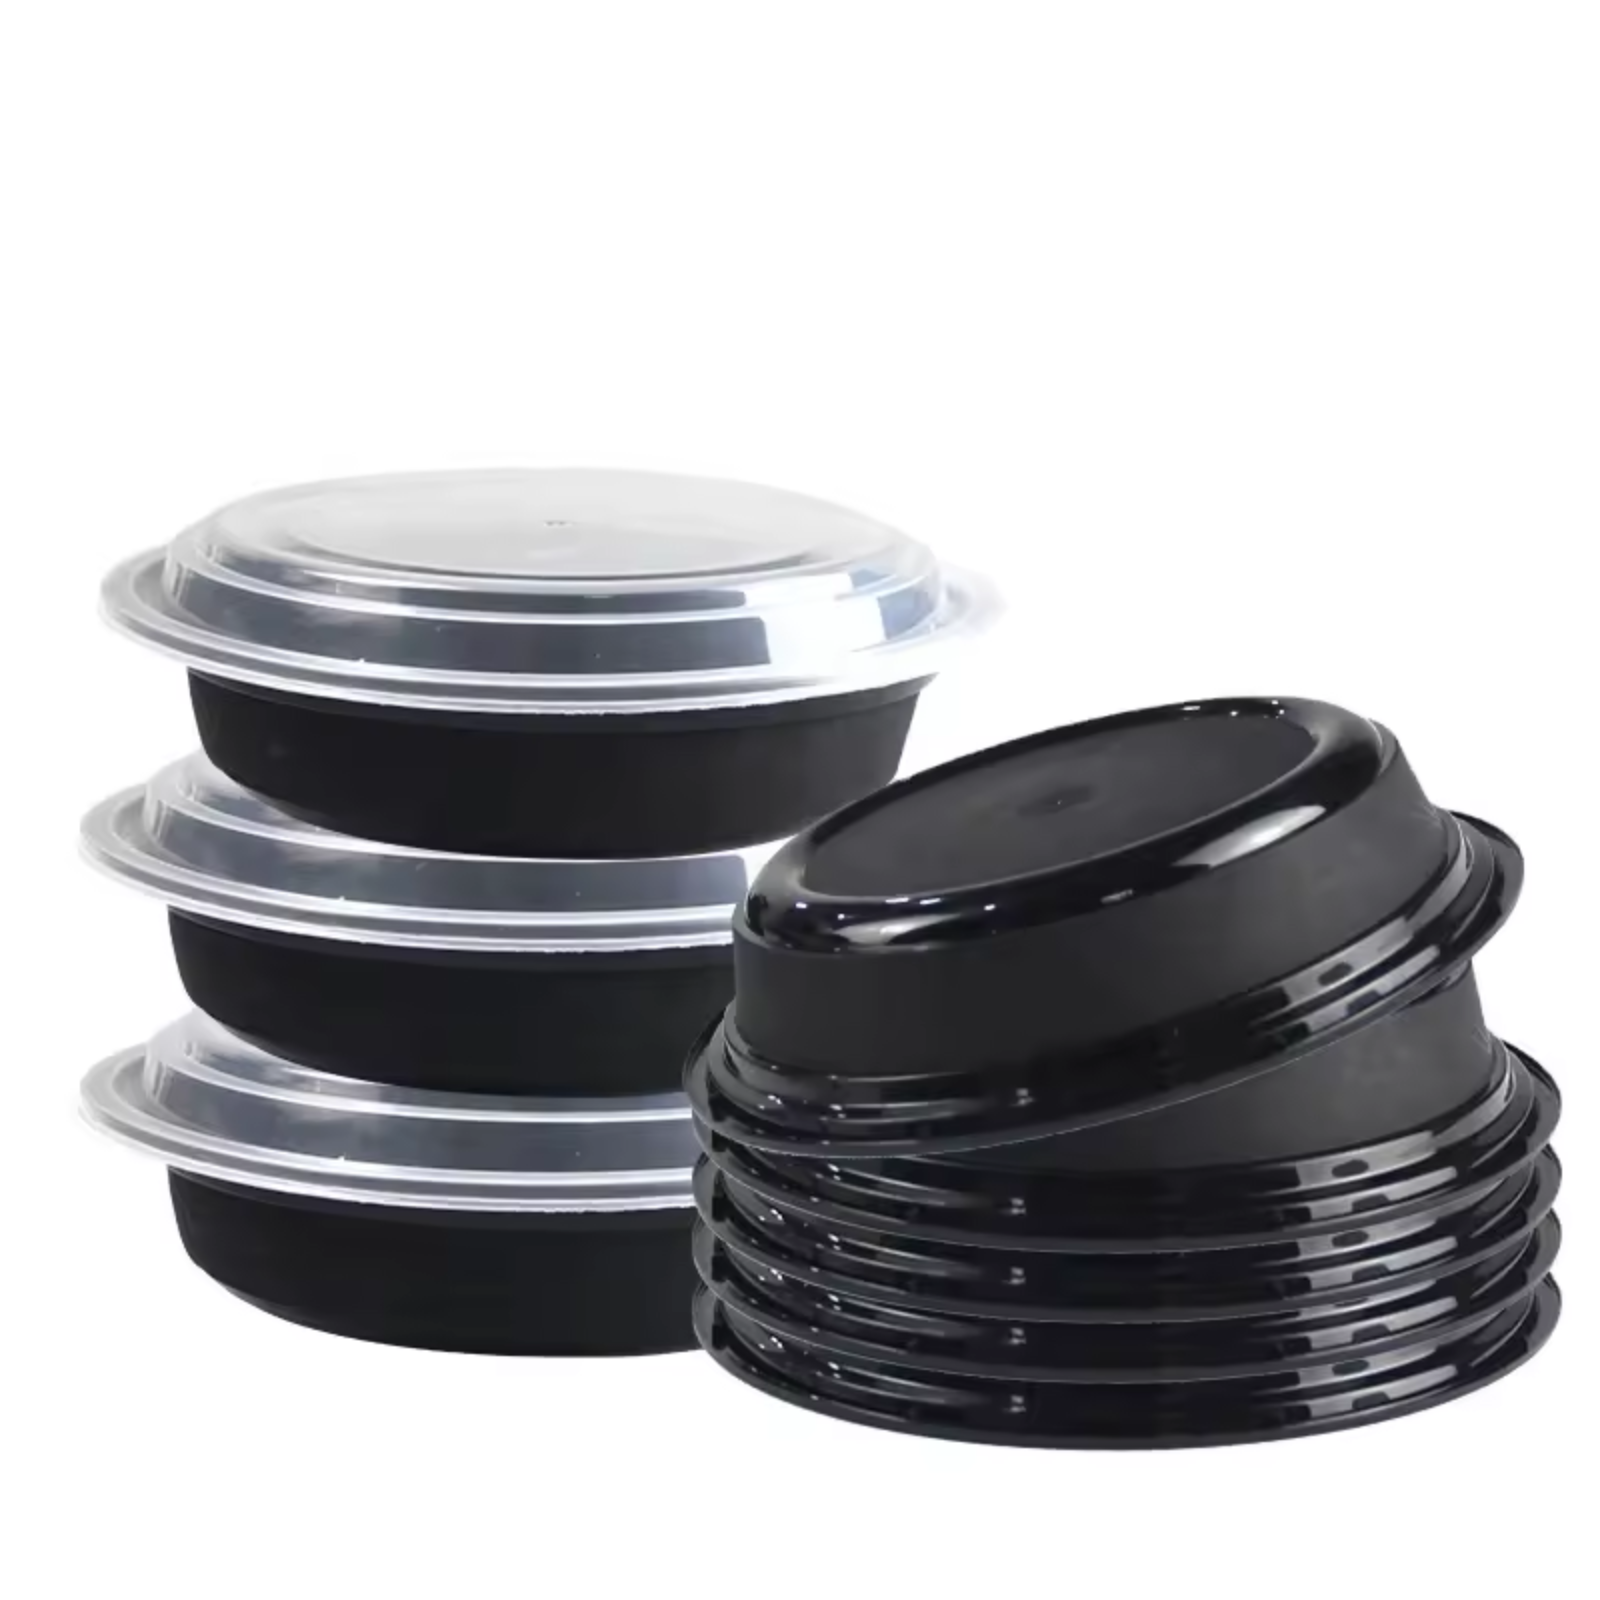 48oz. Disposable Round Meal Prep/ Bento Box Containers with Clear Lids Food Storage & Serving VeZee   